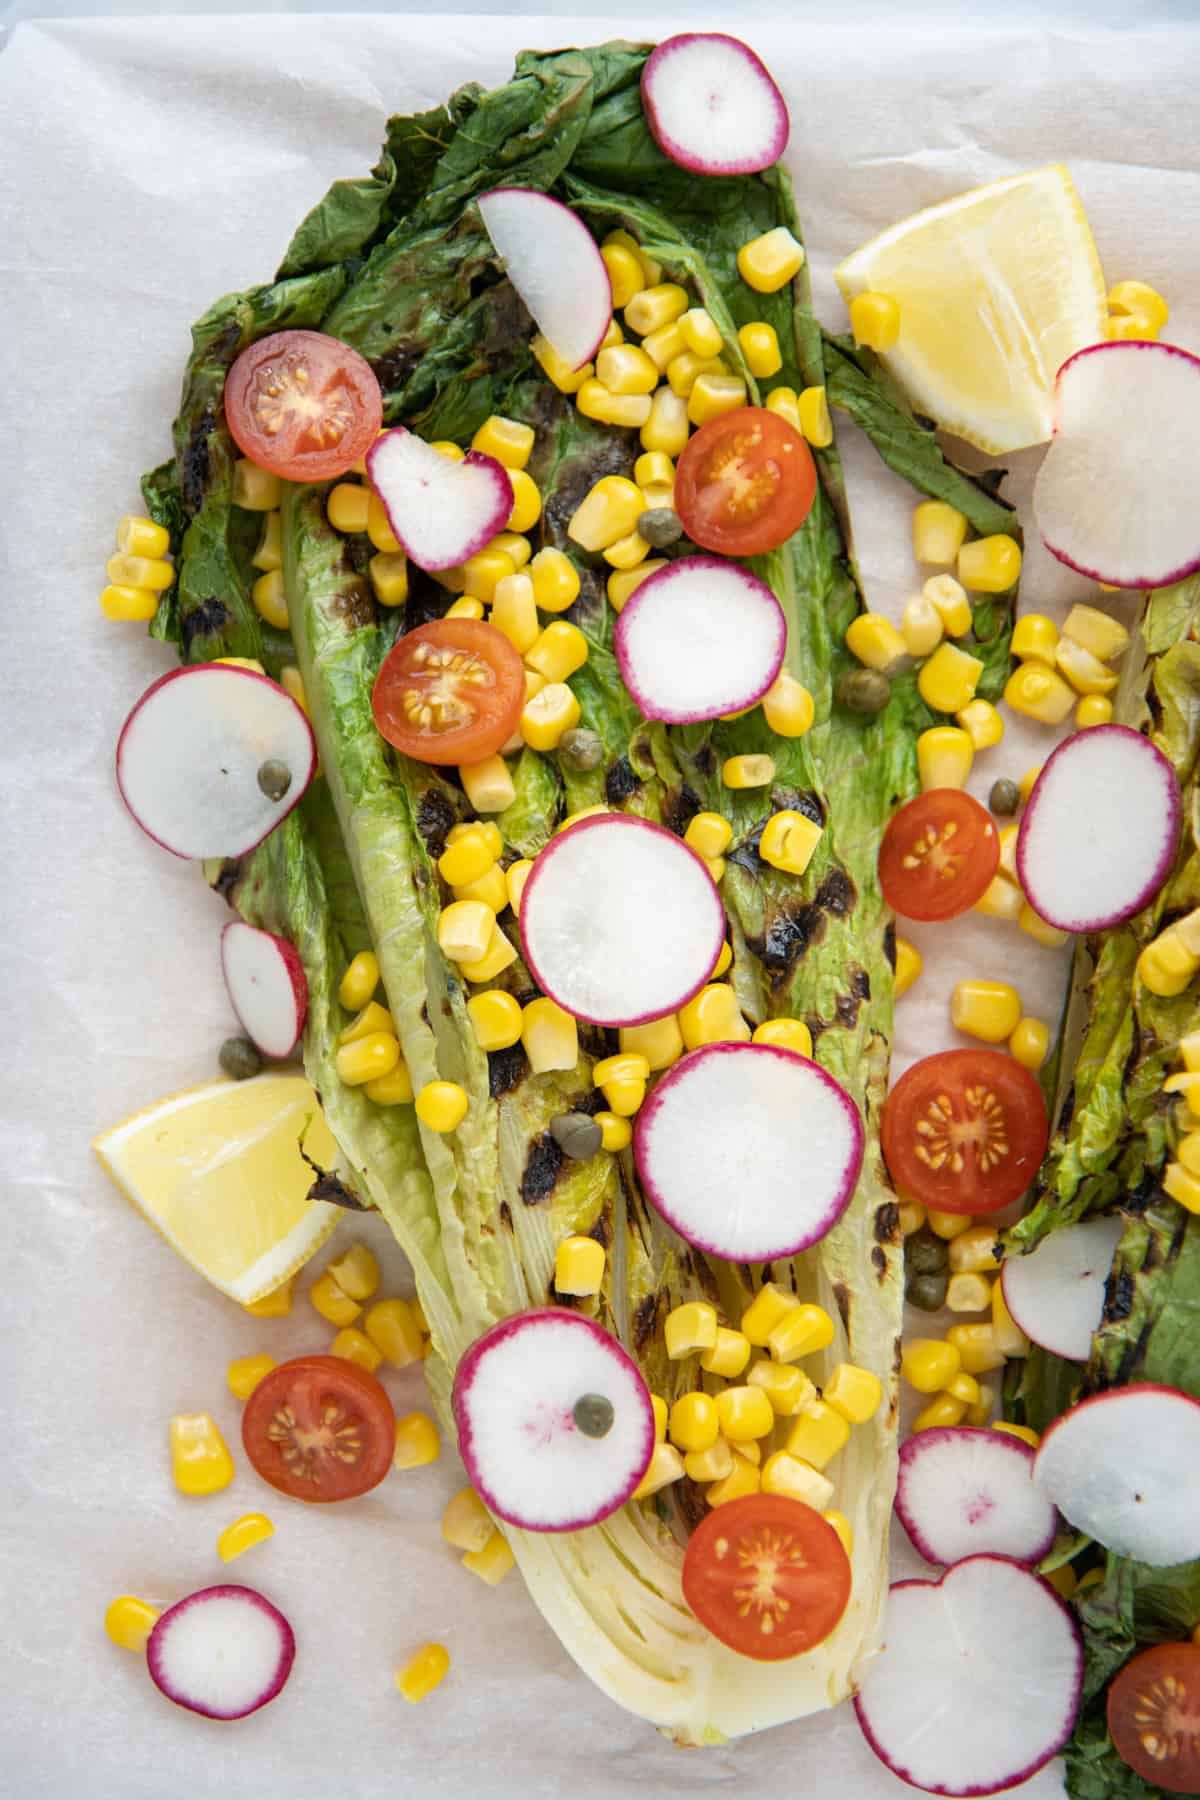 Head of grilled romaine lettuce topped with corn, radishes, and tomatoes